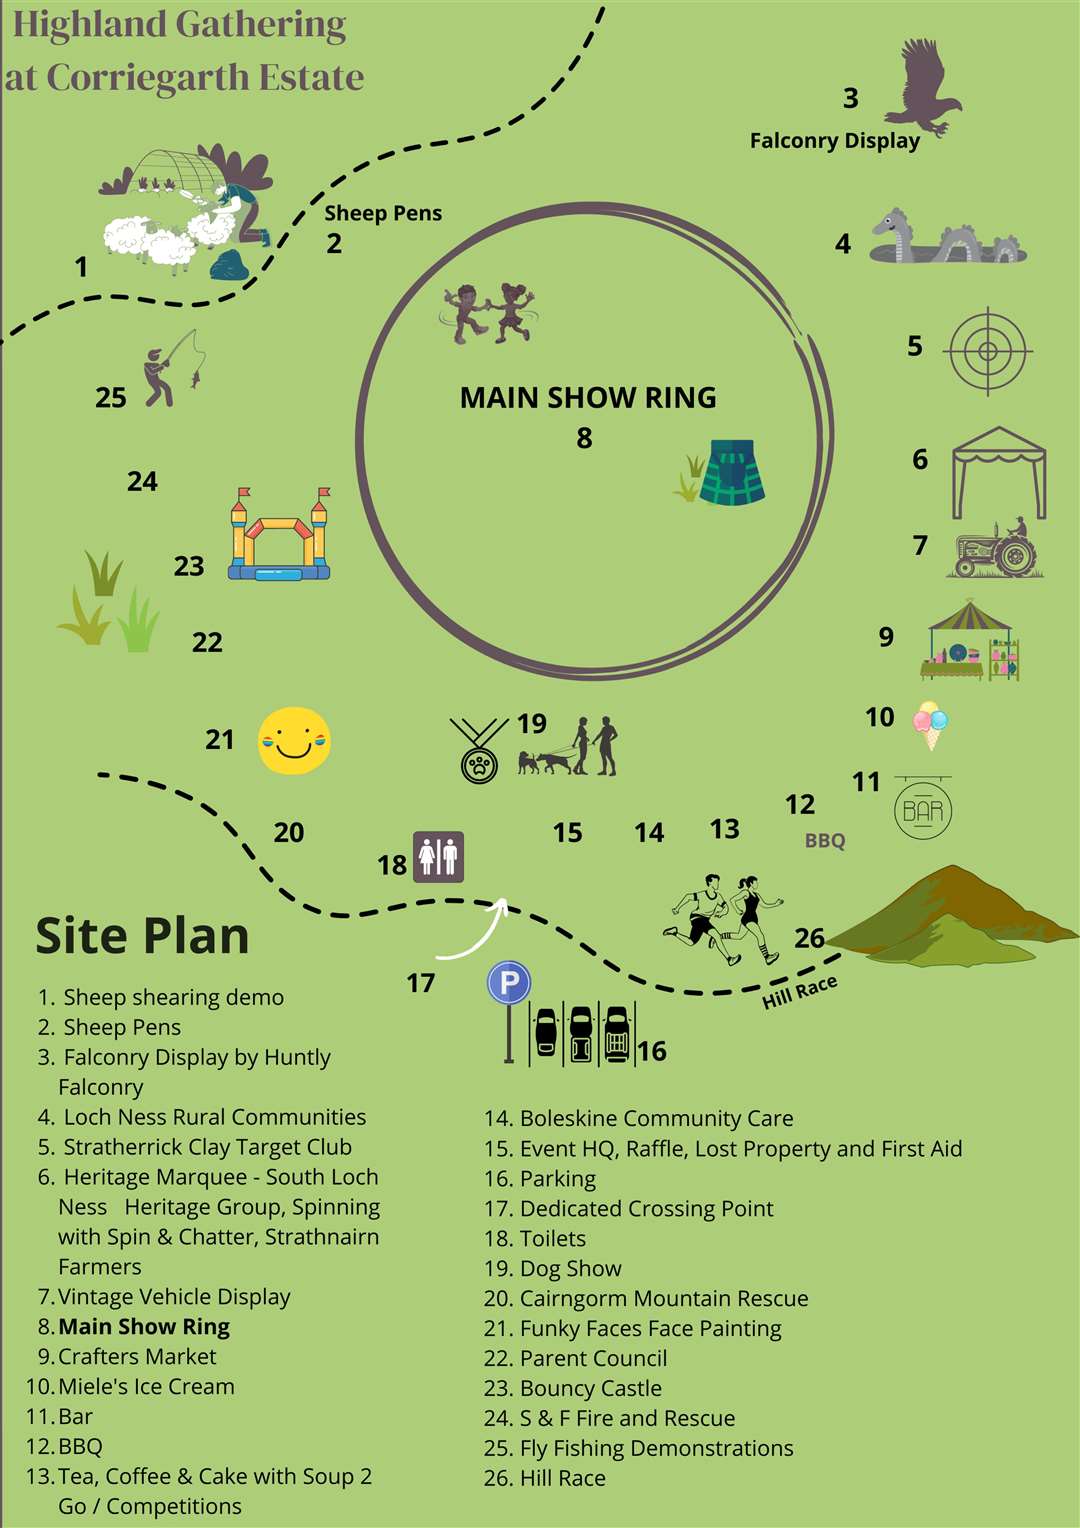 The site plan.